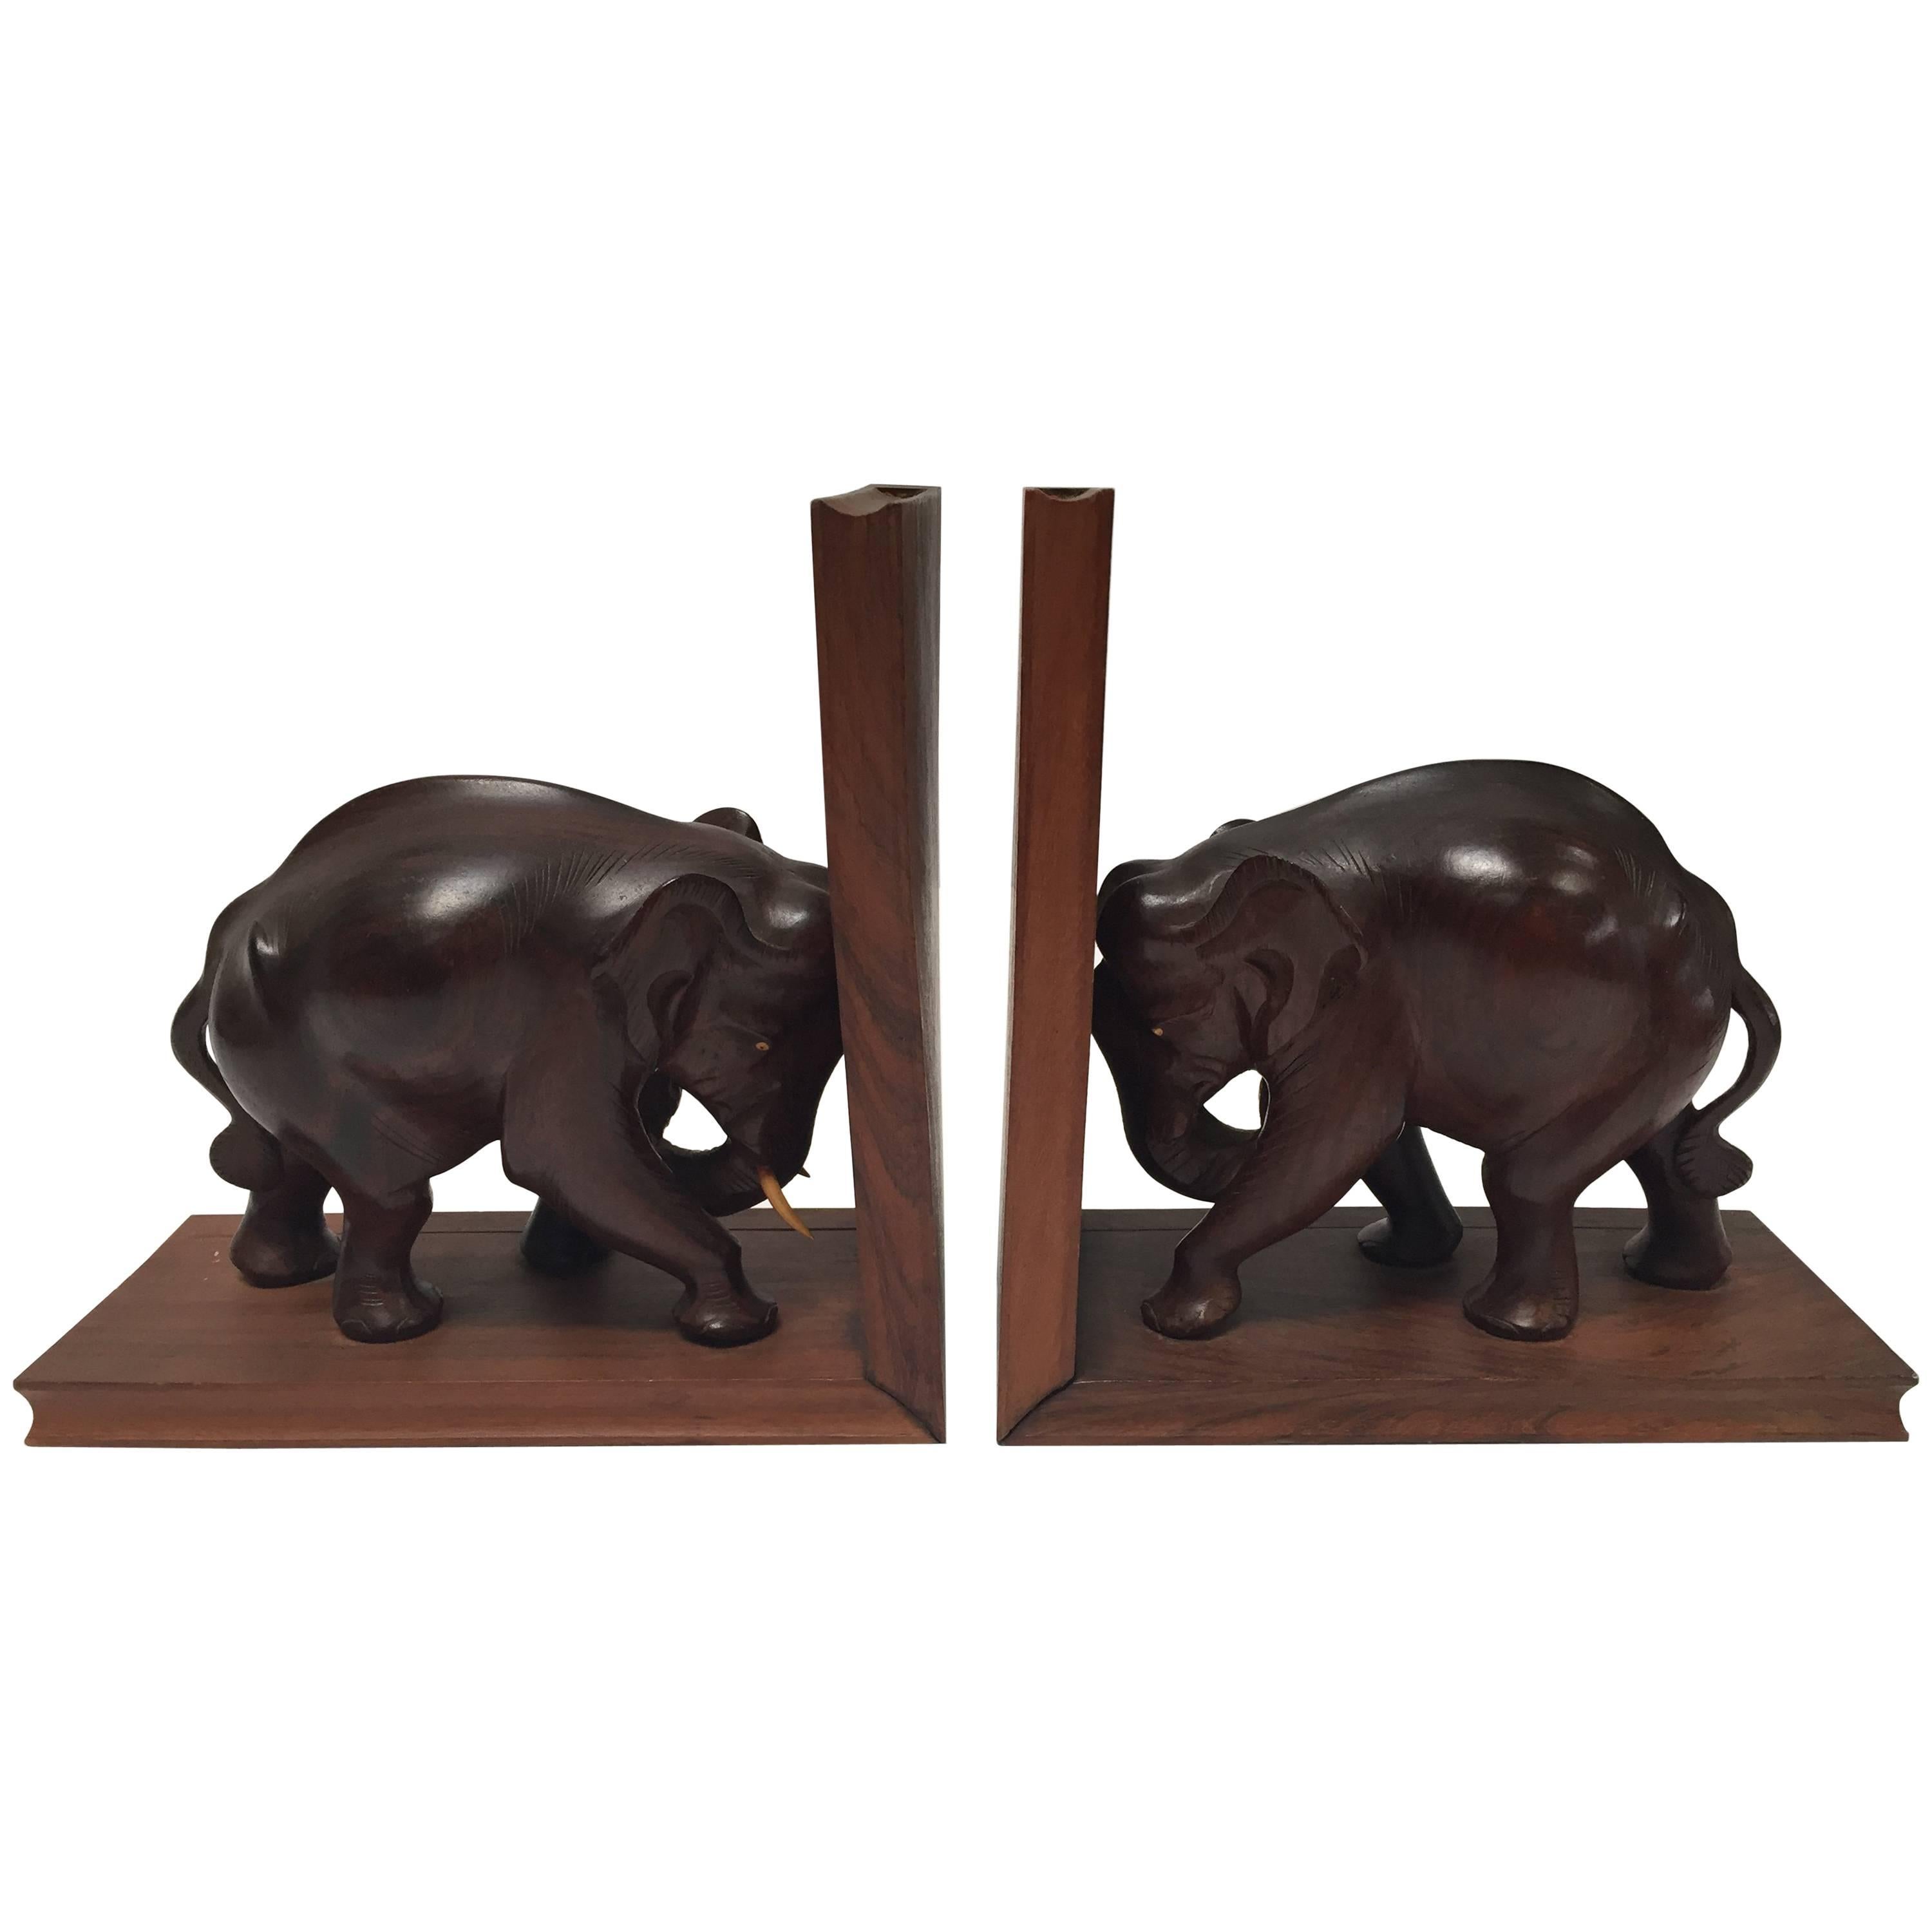 Hand-Carved Wooden Elephant Bookends, circa 1950